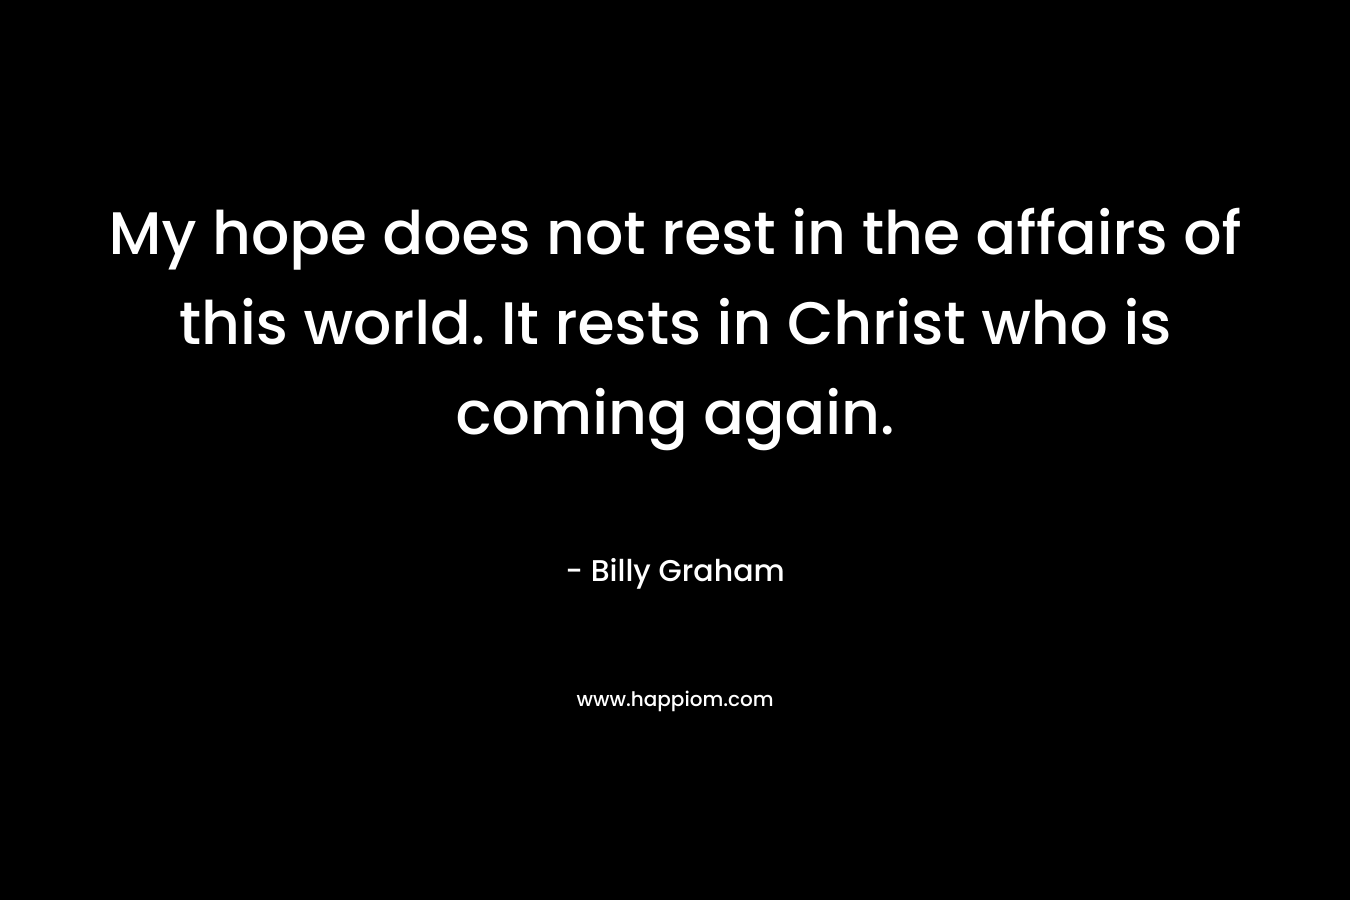 My hope does not rest in the affairs of this world. It rests in Christ who is coming again. – Billy Graham